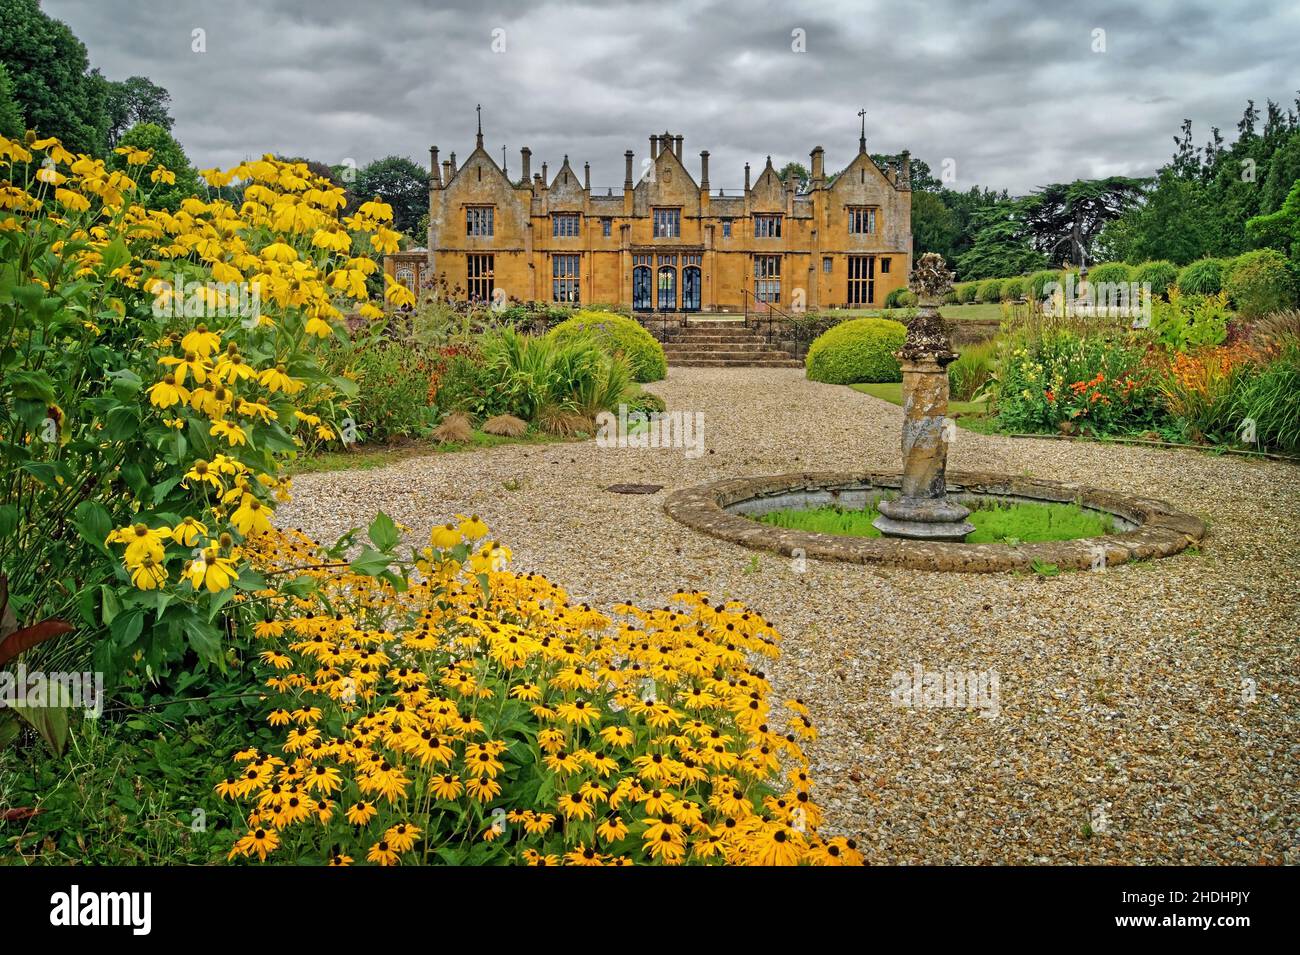 UK, Somerset, Ilminster, Dillington House and Grounds Stock Photo